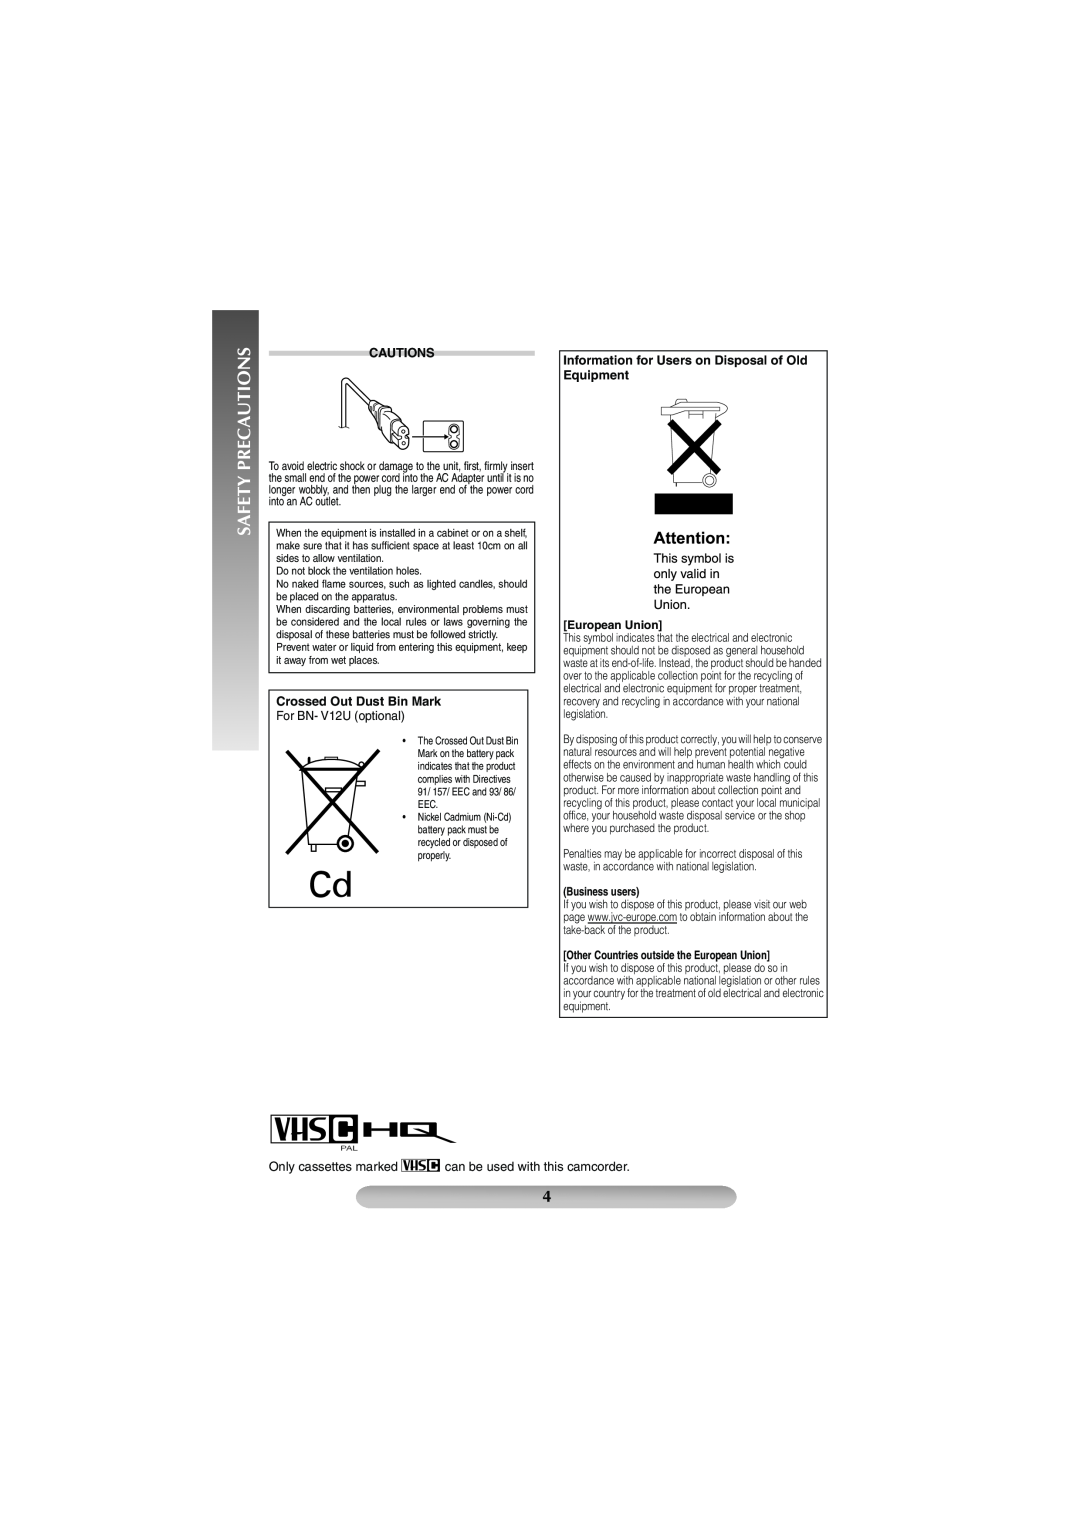 JVC GR-FXM42EK Crossed Out Dust Bin Mark, Information for Users on Disposal of Old Equipment European Union, Cautions 